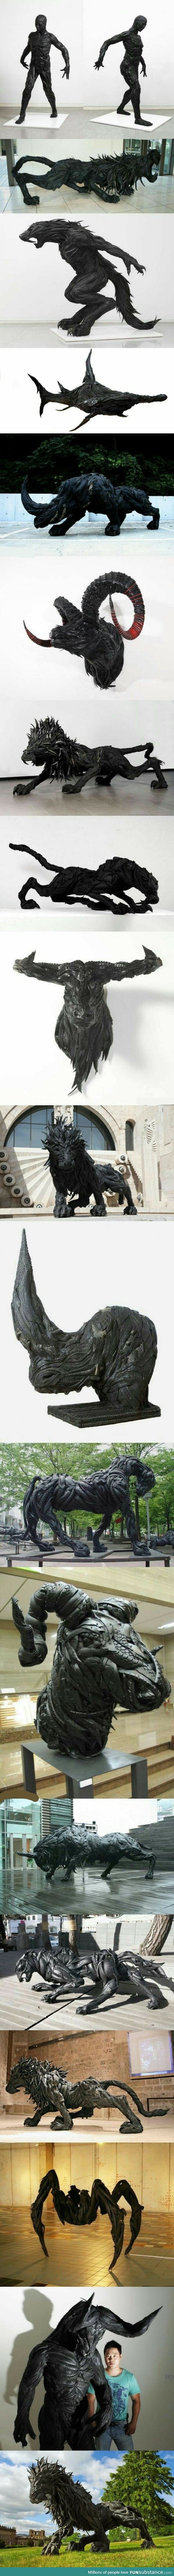 Sculptures all made with used tires